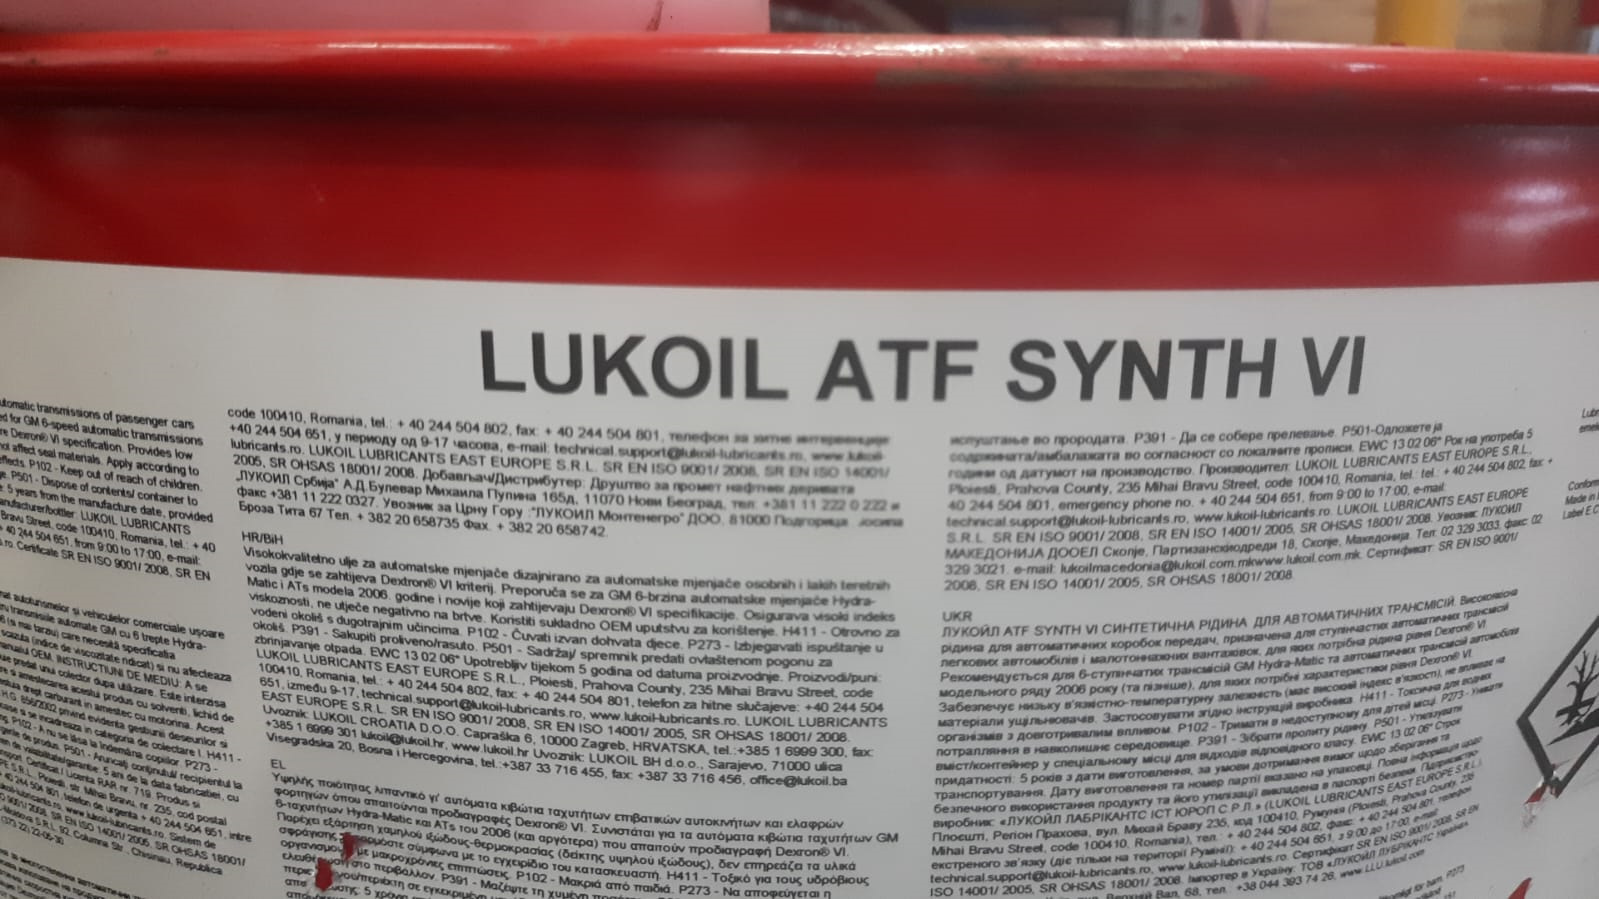 Atf synth vi. Лукойл ATF бочка.